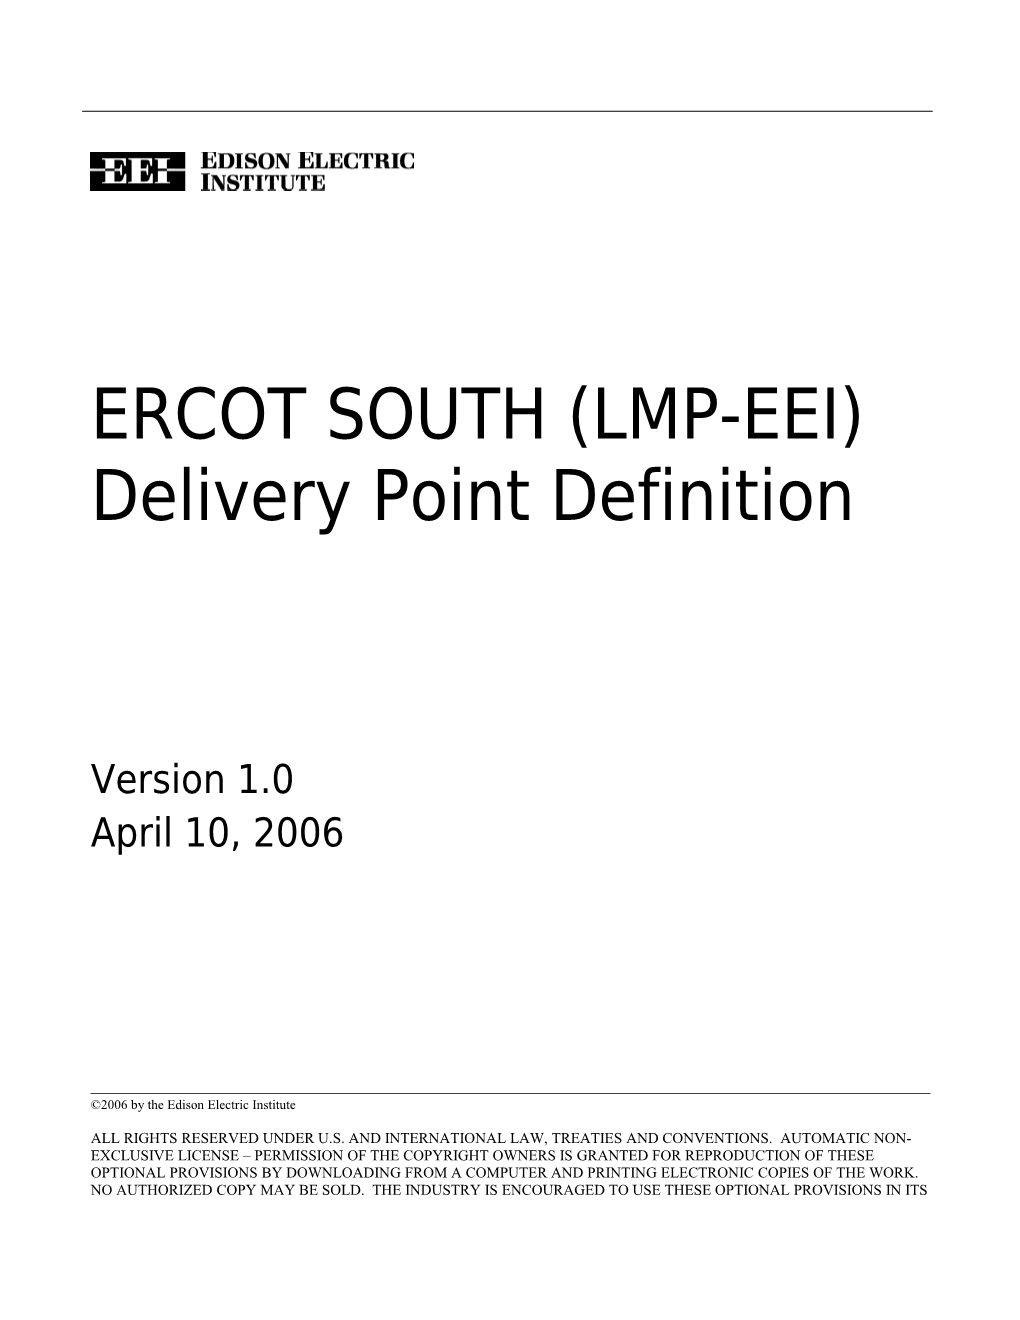 ERCOT South (LMP-EEI) Delivery Point Definition, Version 1.0, 4/10/061